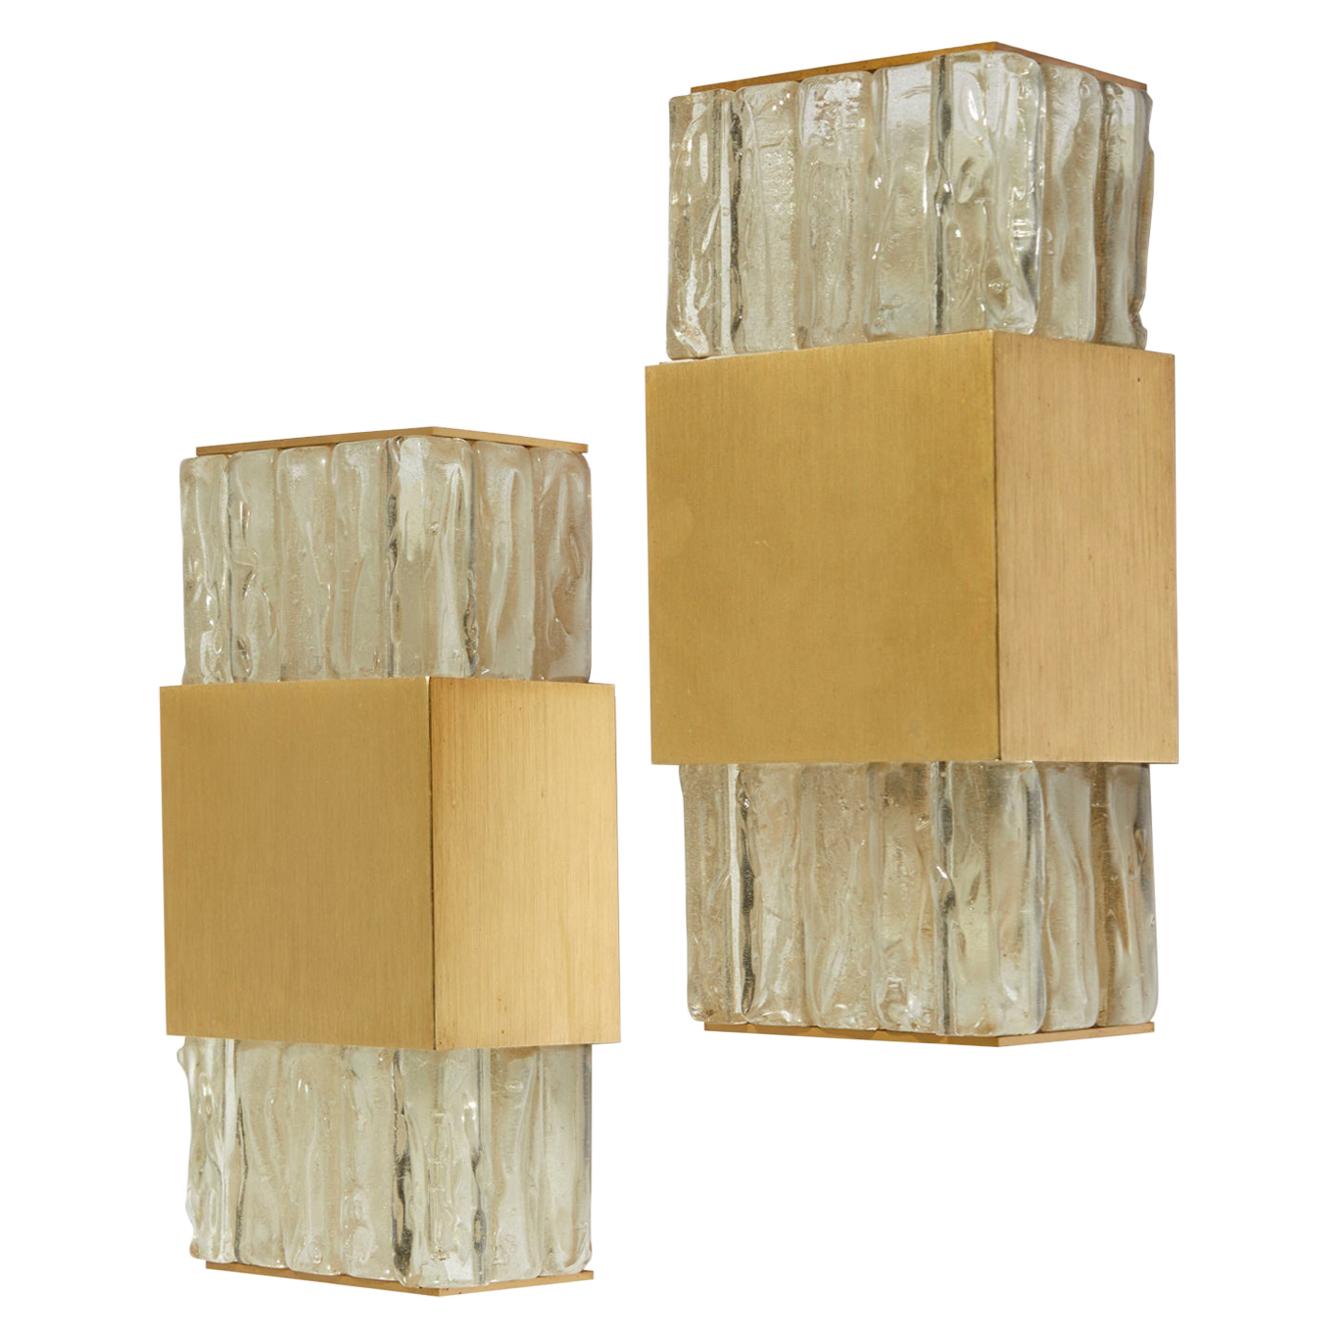 Pair of Modernist Wall Sconces